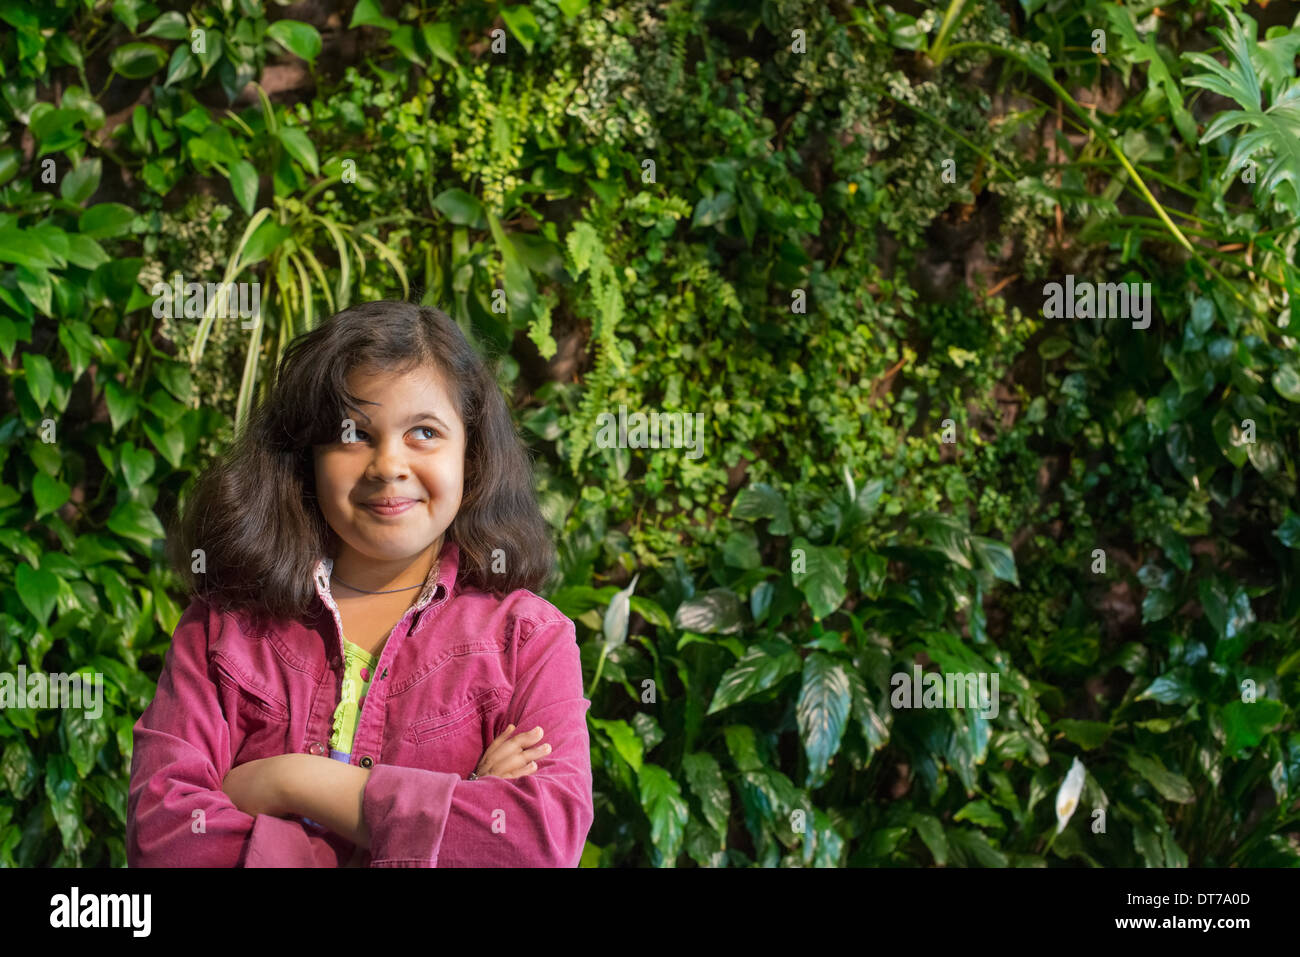 A young girl standing in front of a wall covered with ferns and climbing plants. Stock Photo